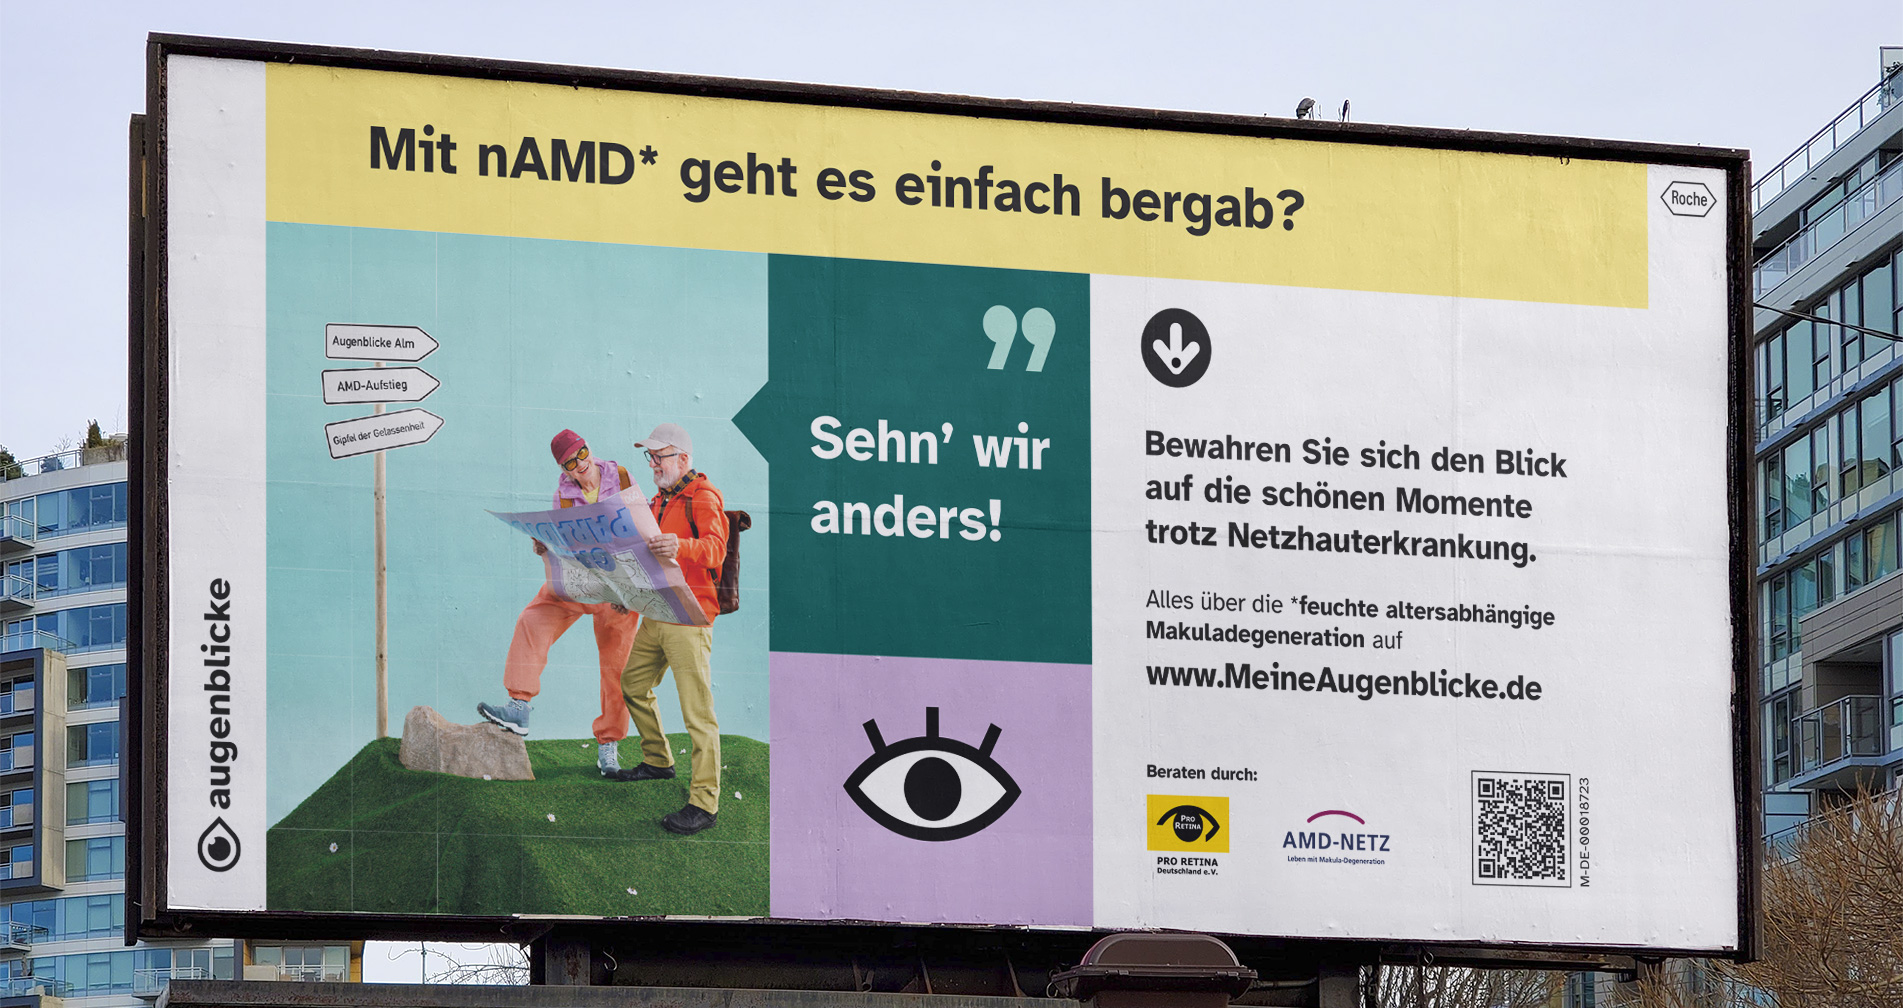 Roche Augenblicke campaign for relatives